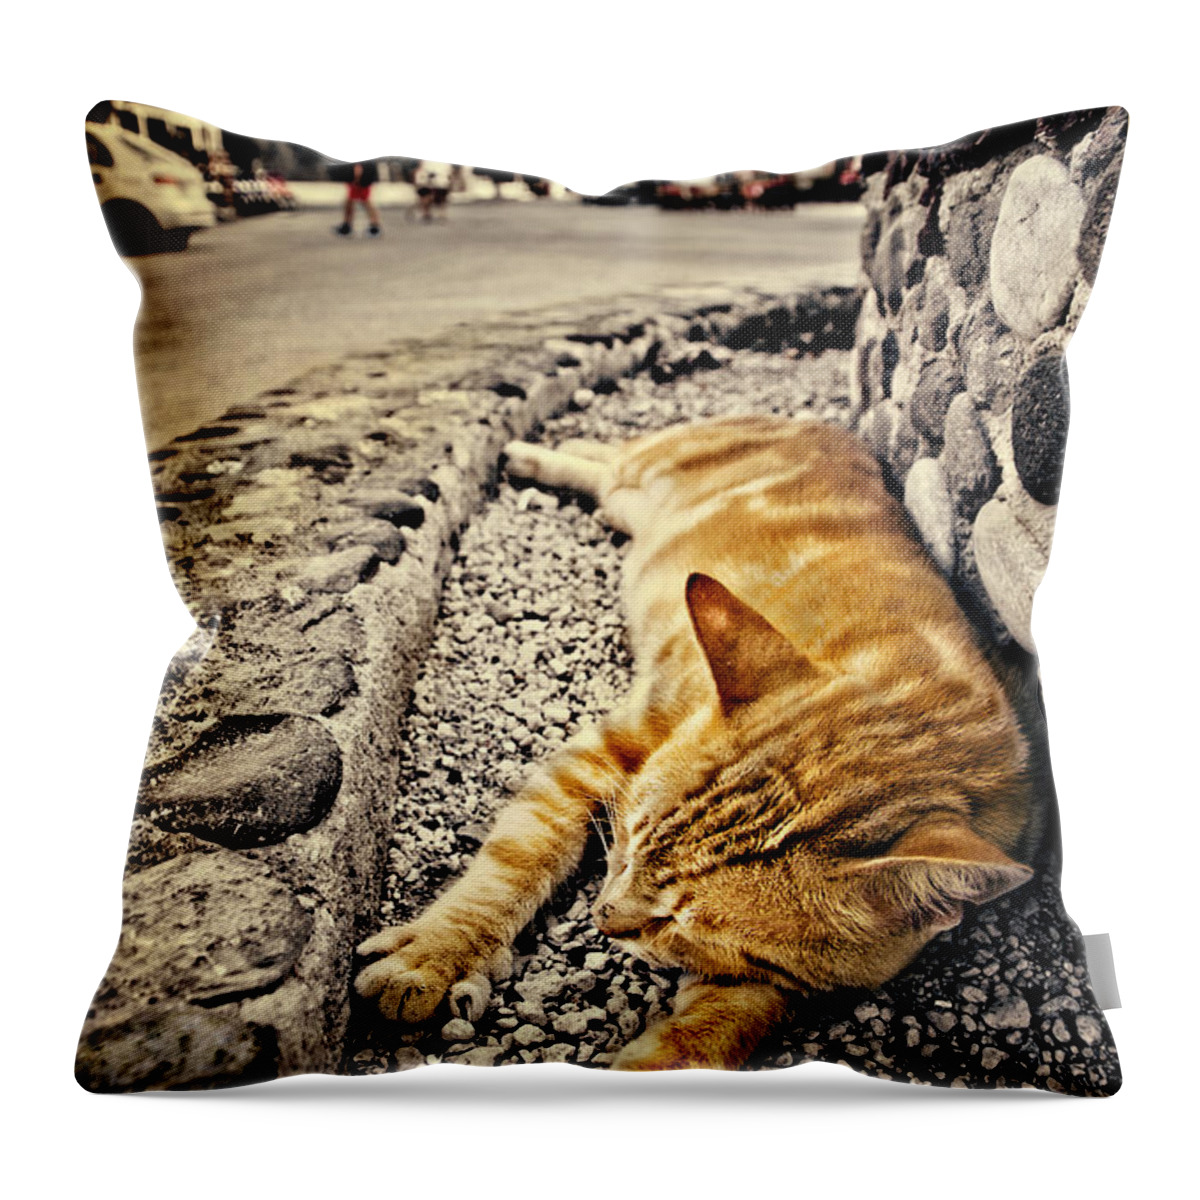 Ginger Throw Pillow featuring the photograph Alley Cat Siesta In Grunge by Meirion Matthias